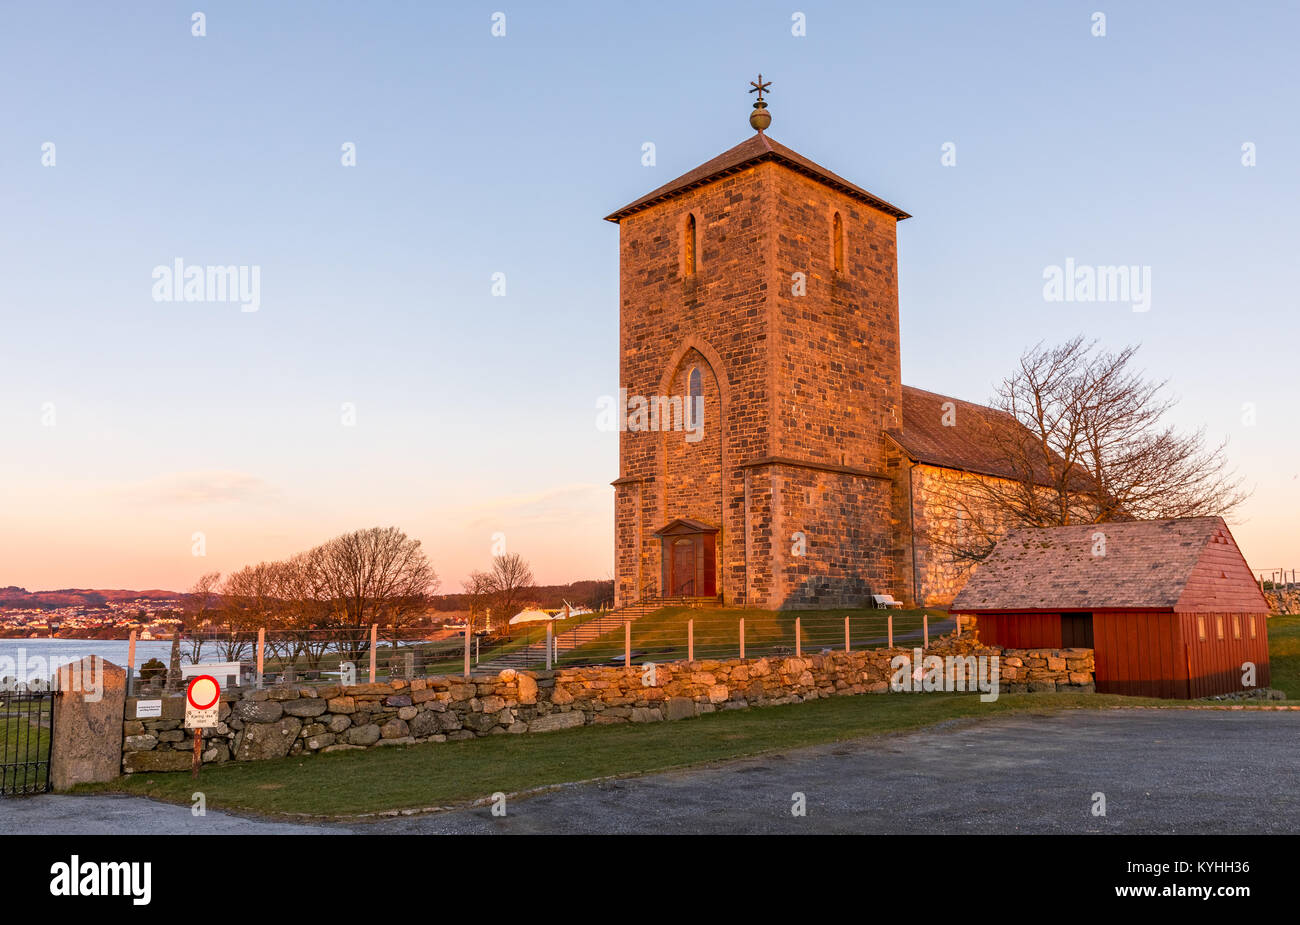 The medieval stone church at Avaldsnes, on the Island of Karmoy, Norway, vertical image of the front entrance and stairs Stock Photo